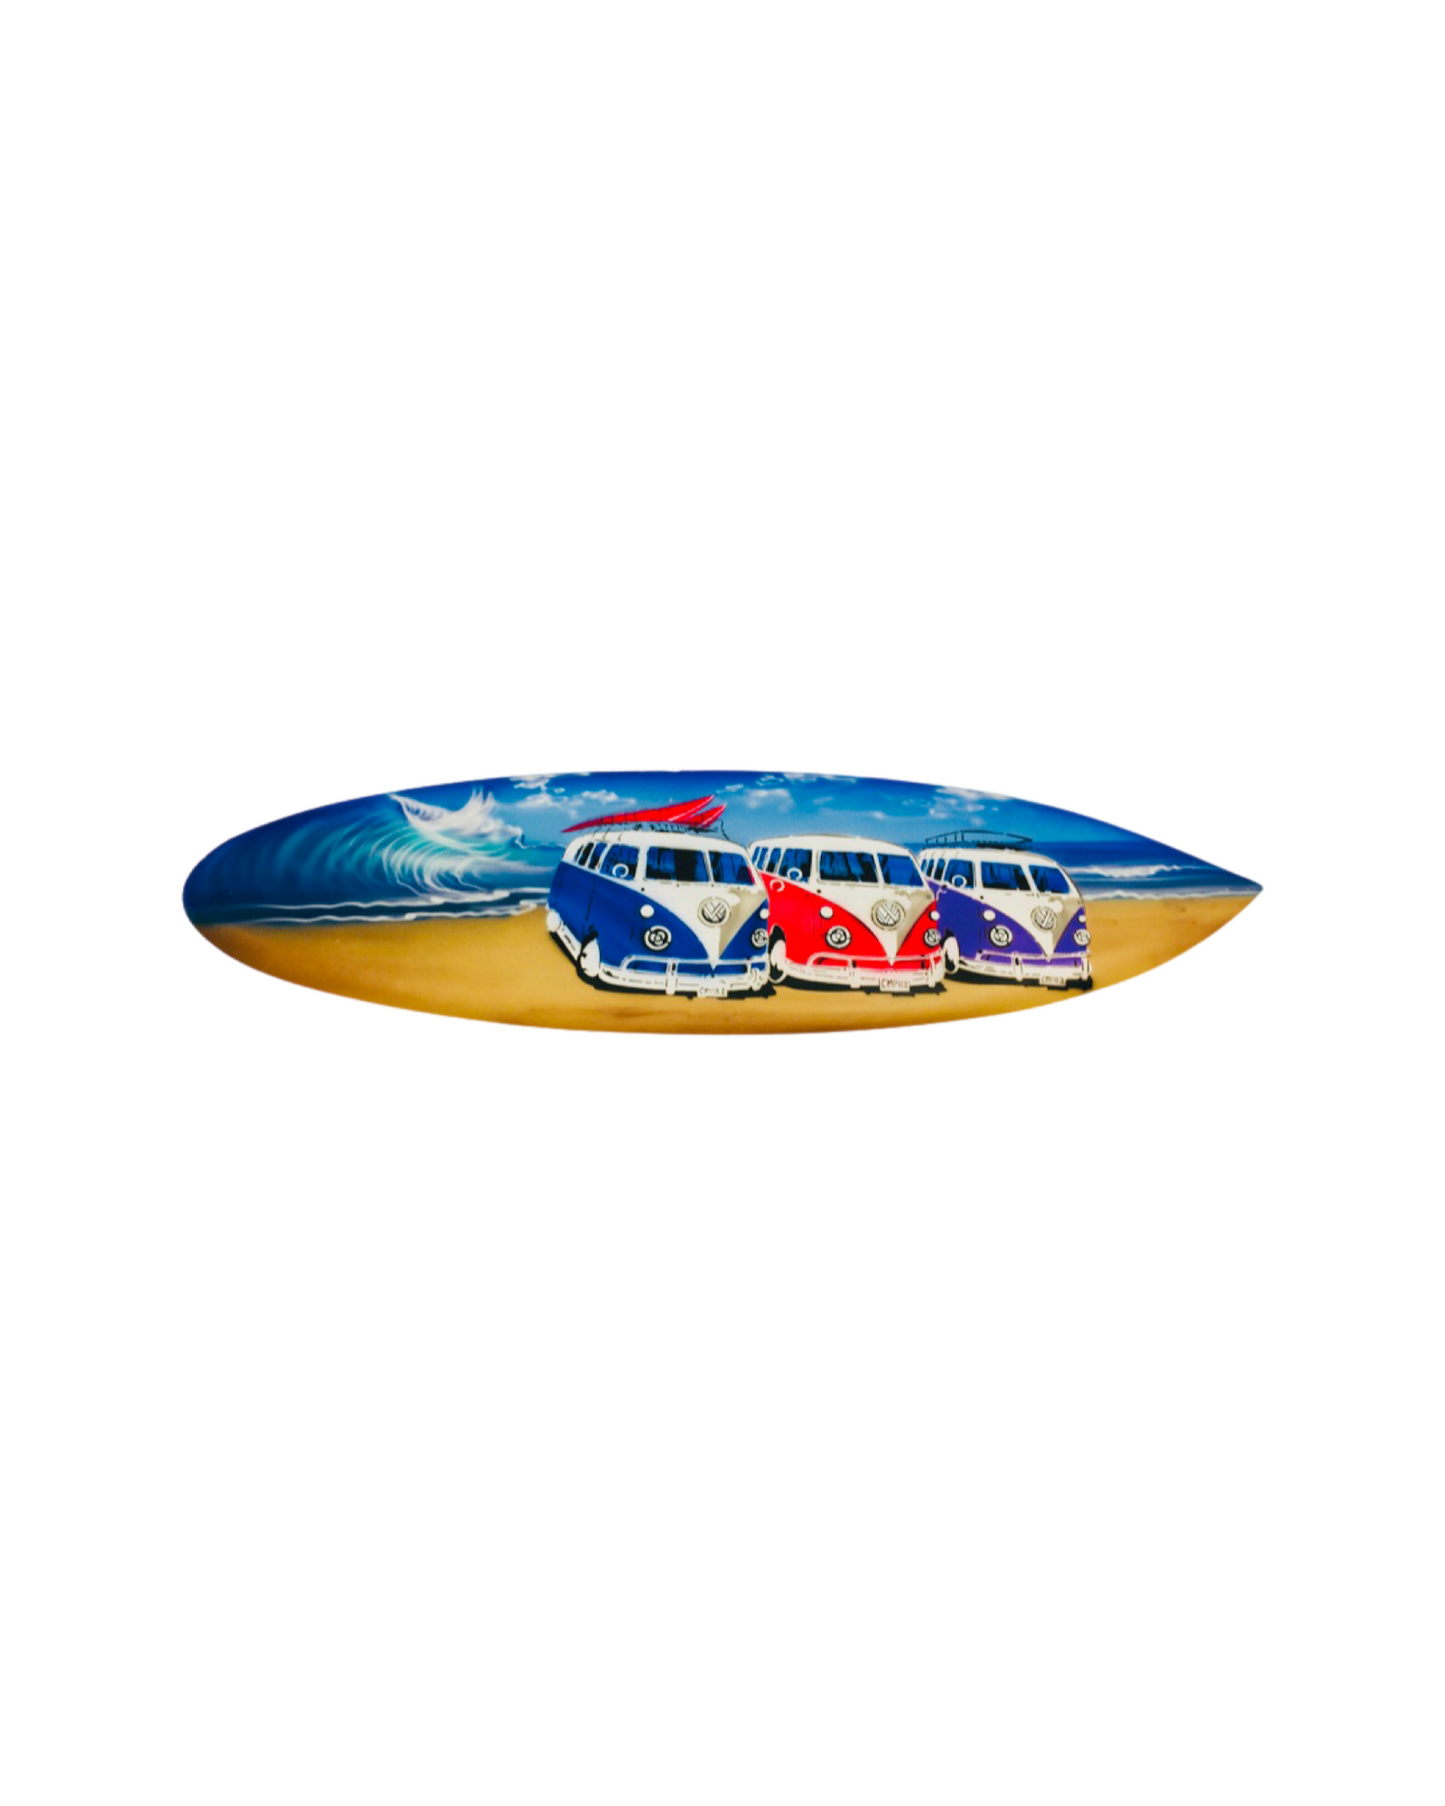 A wooden surfboard with three coloured combis on the beach. Available with 'Surfers Paradise' writing or plain. 